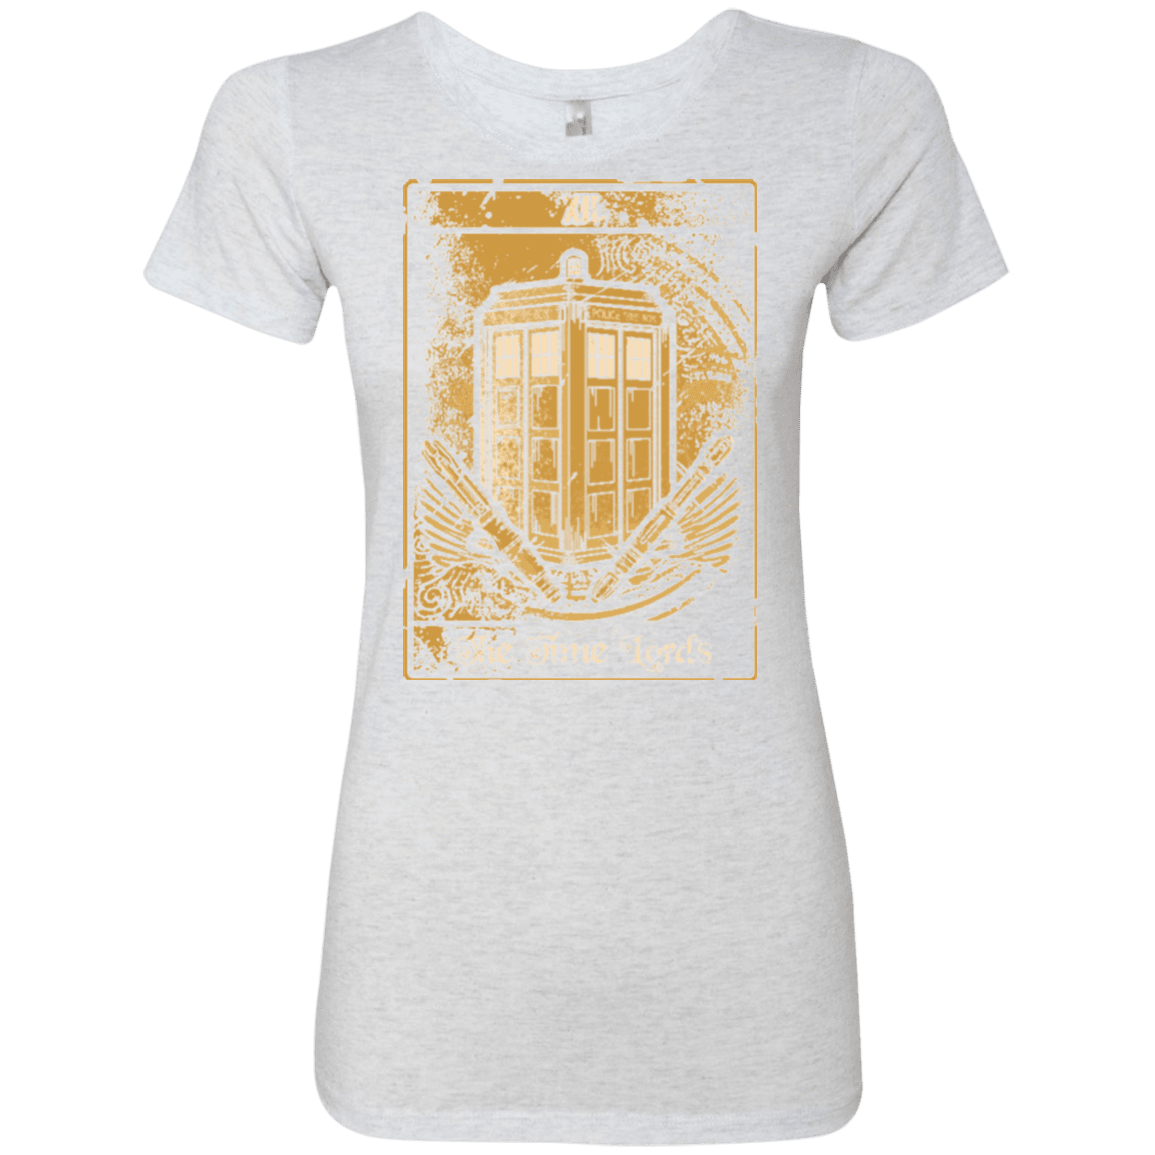 T-Shirts Heather White / Small THE TIMELORDS Women's Triblend T-Shirt